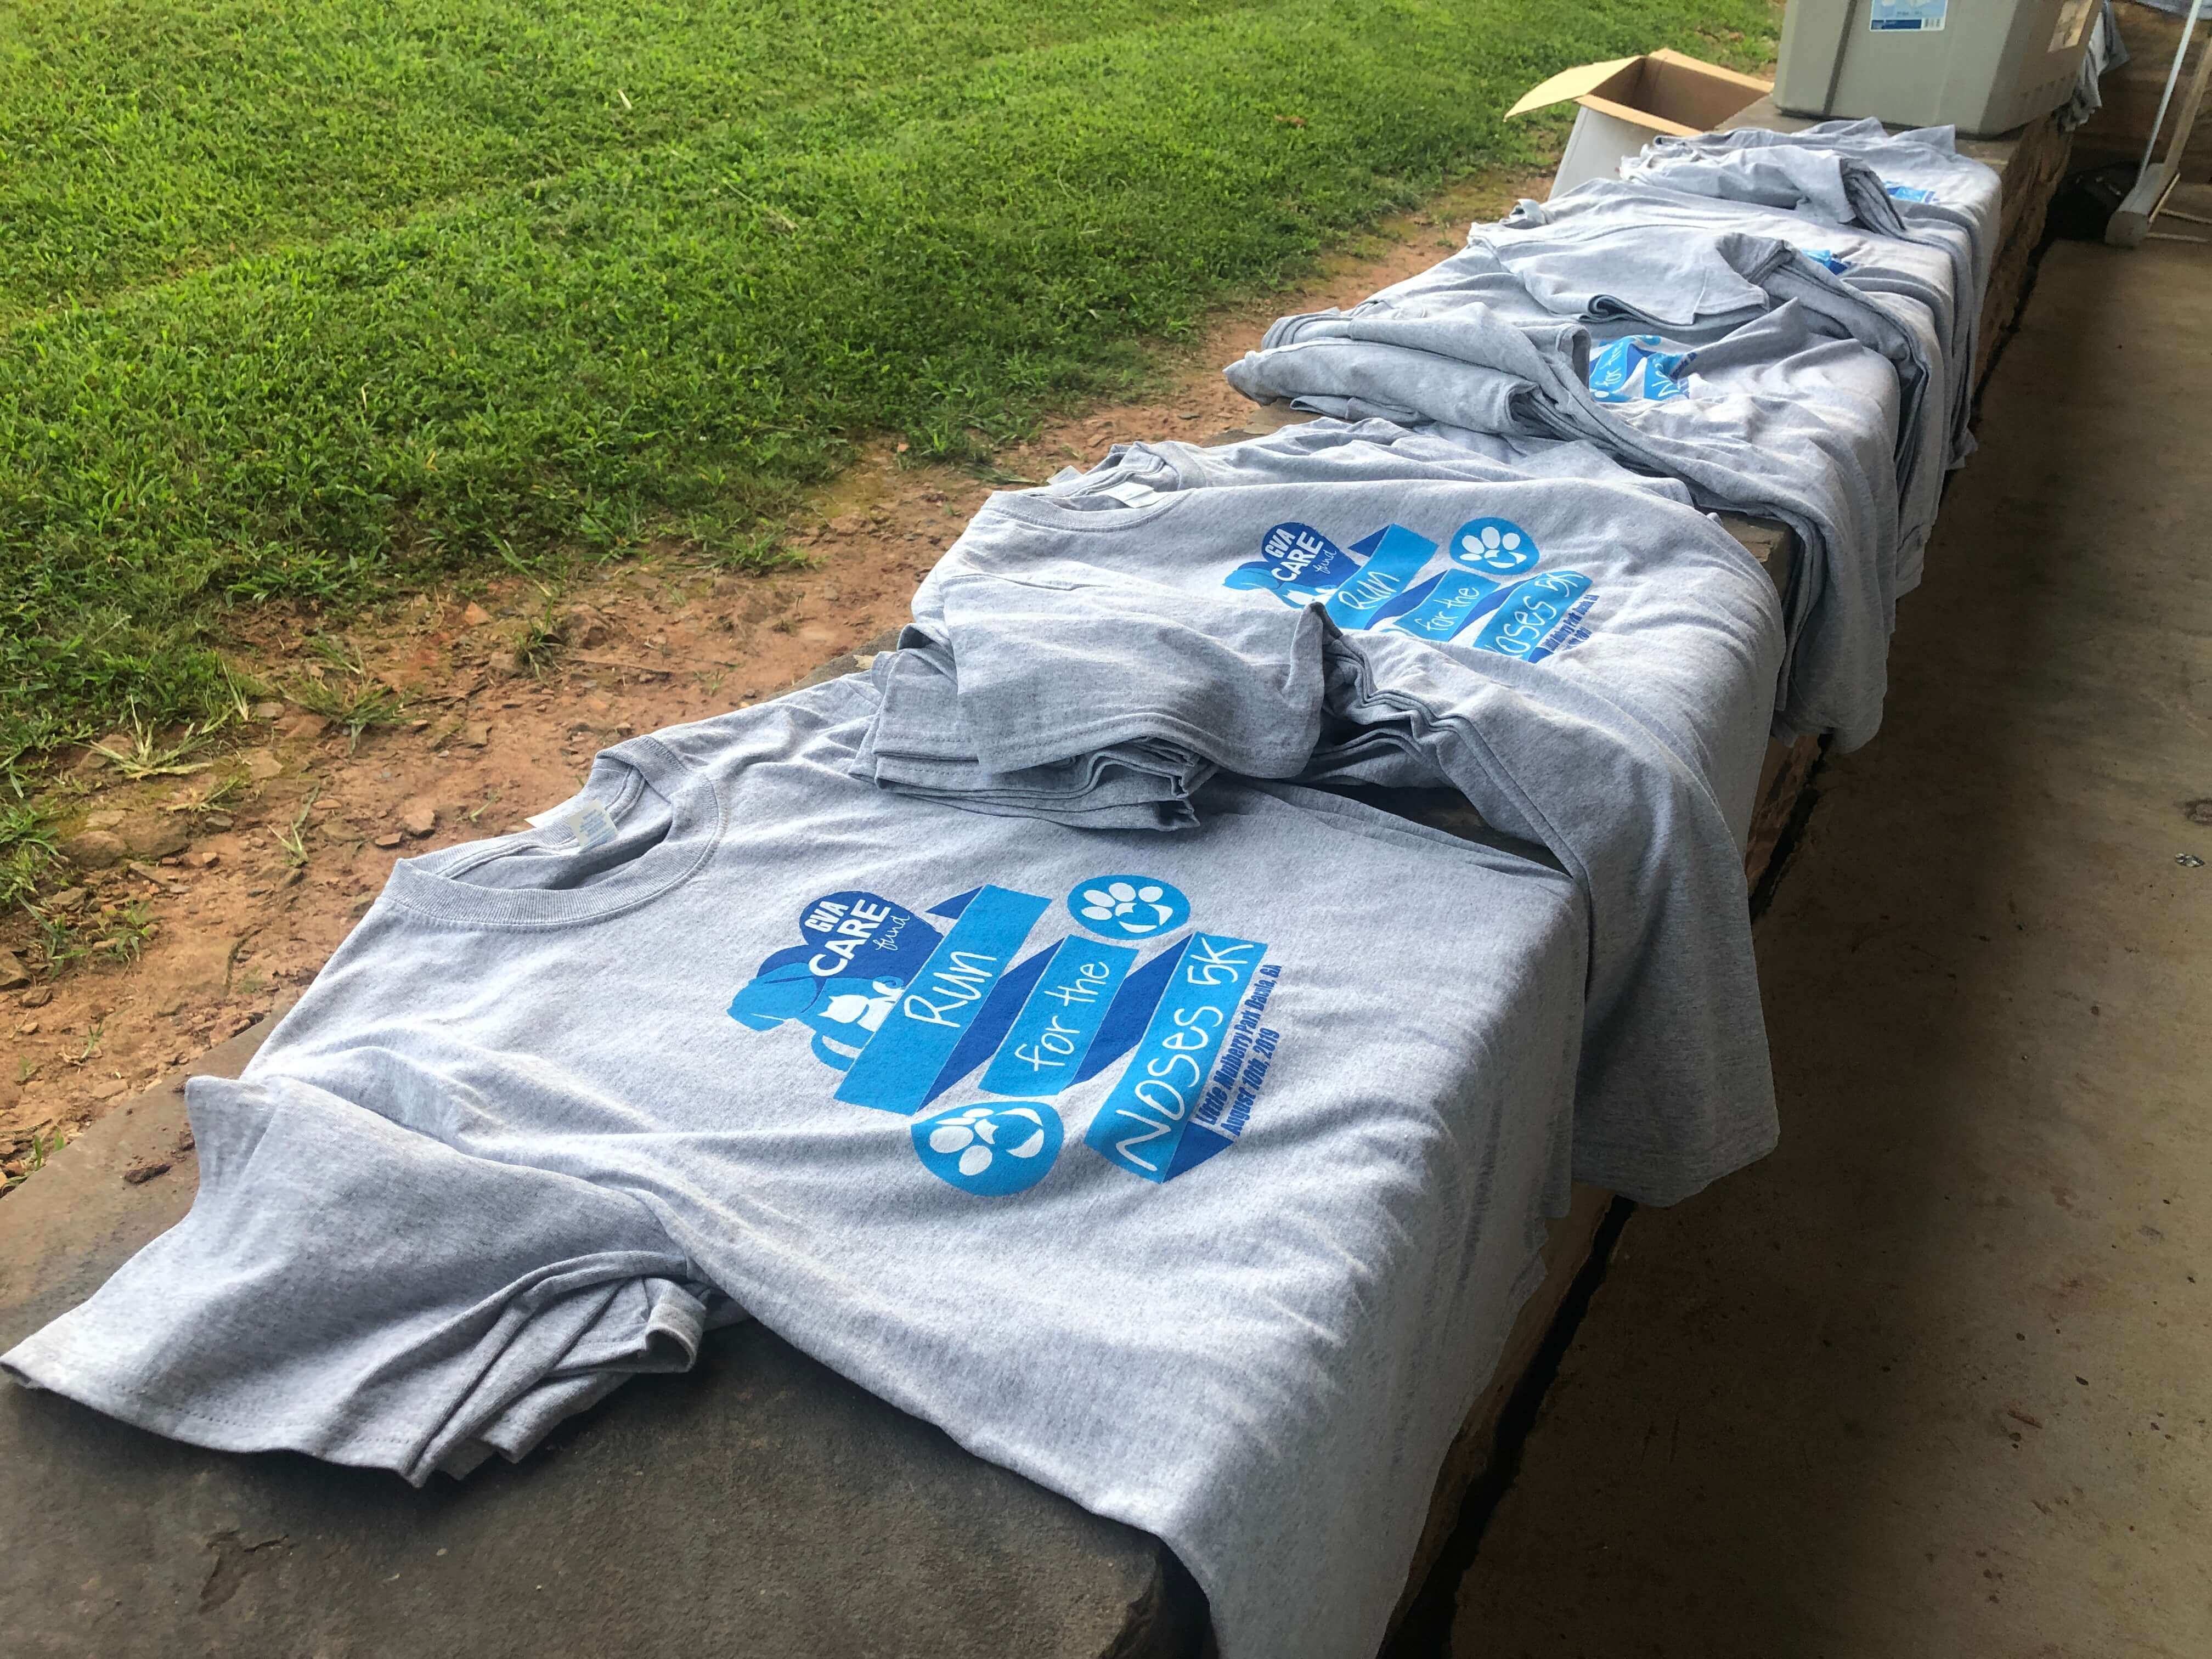 2019 GVA CARE Fund Run for the Noses 5k: shirts